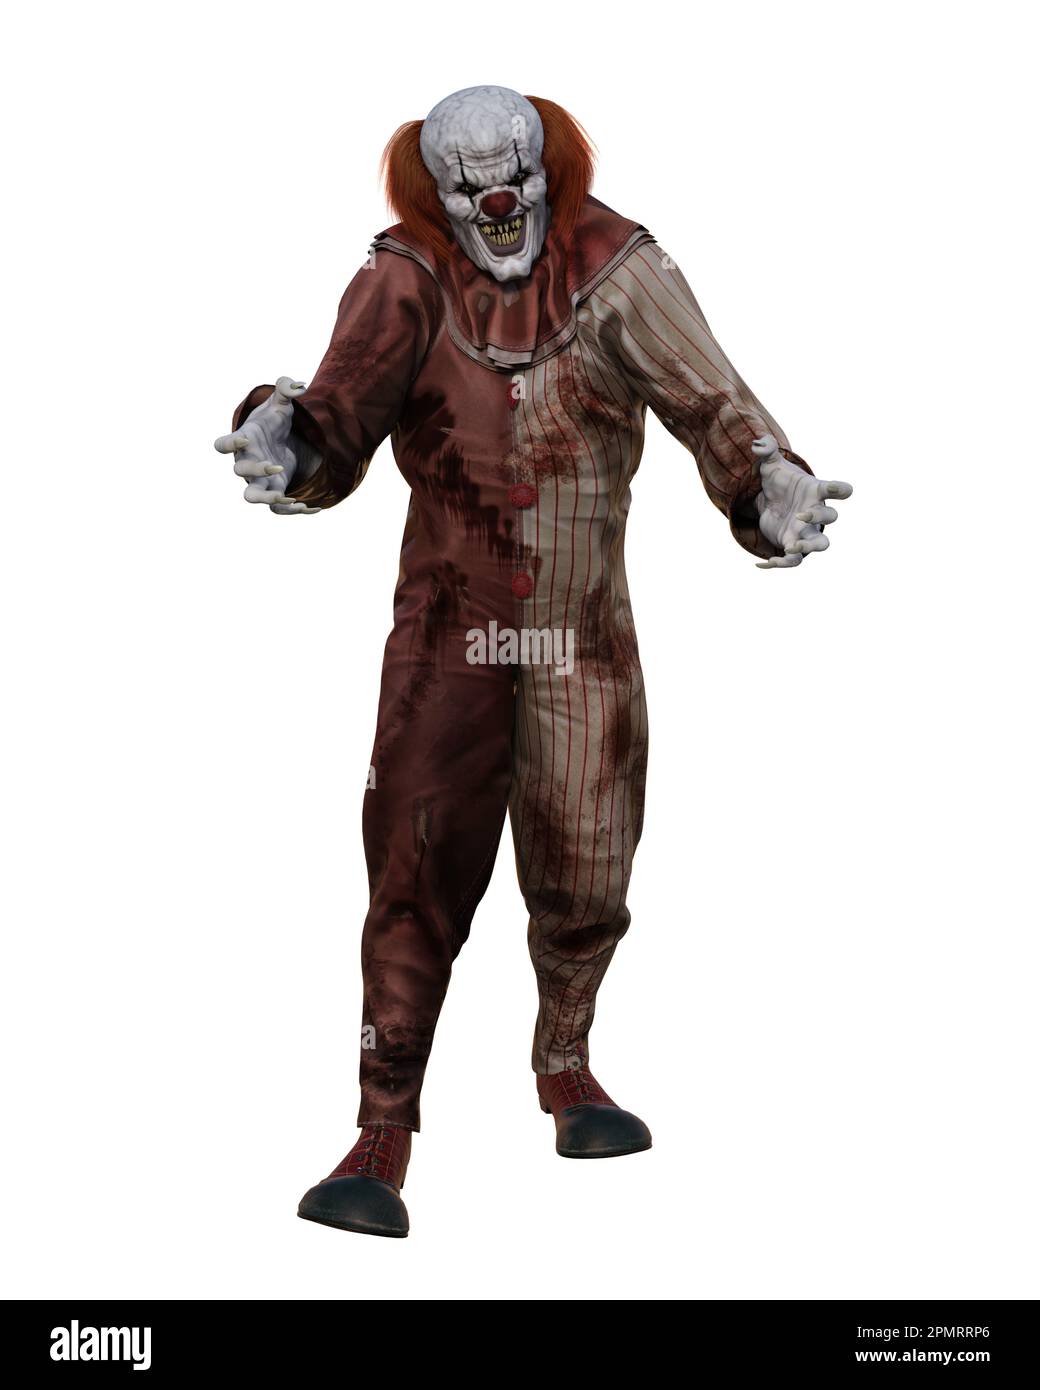 Evil clown in blood stained costume walking towards the camera reaching with outstretched hands showing sharp pointed teeth and nails.   3D illustrati Stock Photo